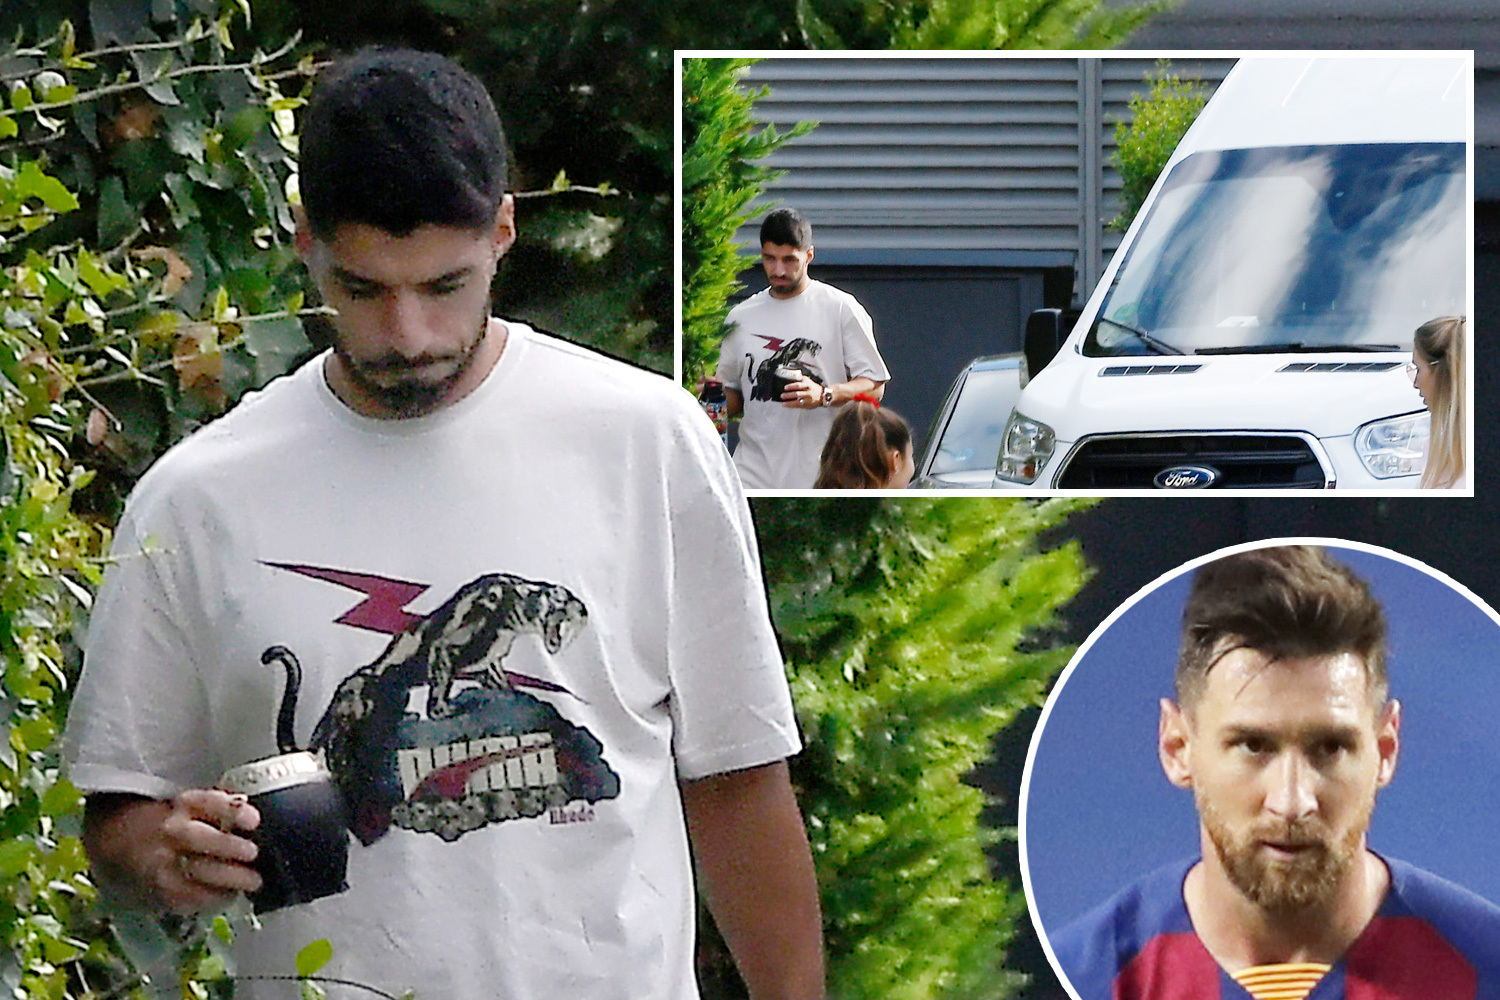 Luis Suarez and his family visit Lionel Messi at his house amid uncertainty  over Barcelona stars' futures | The Irish Sun